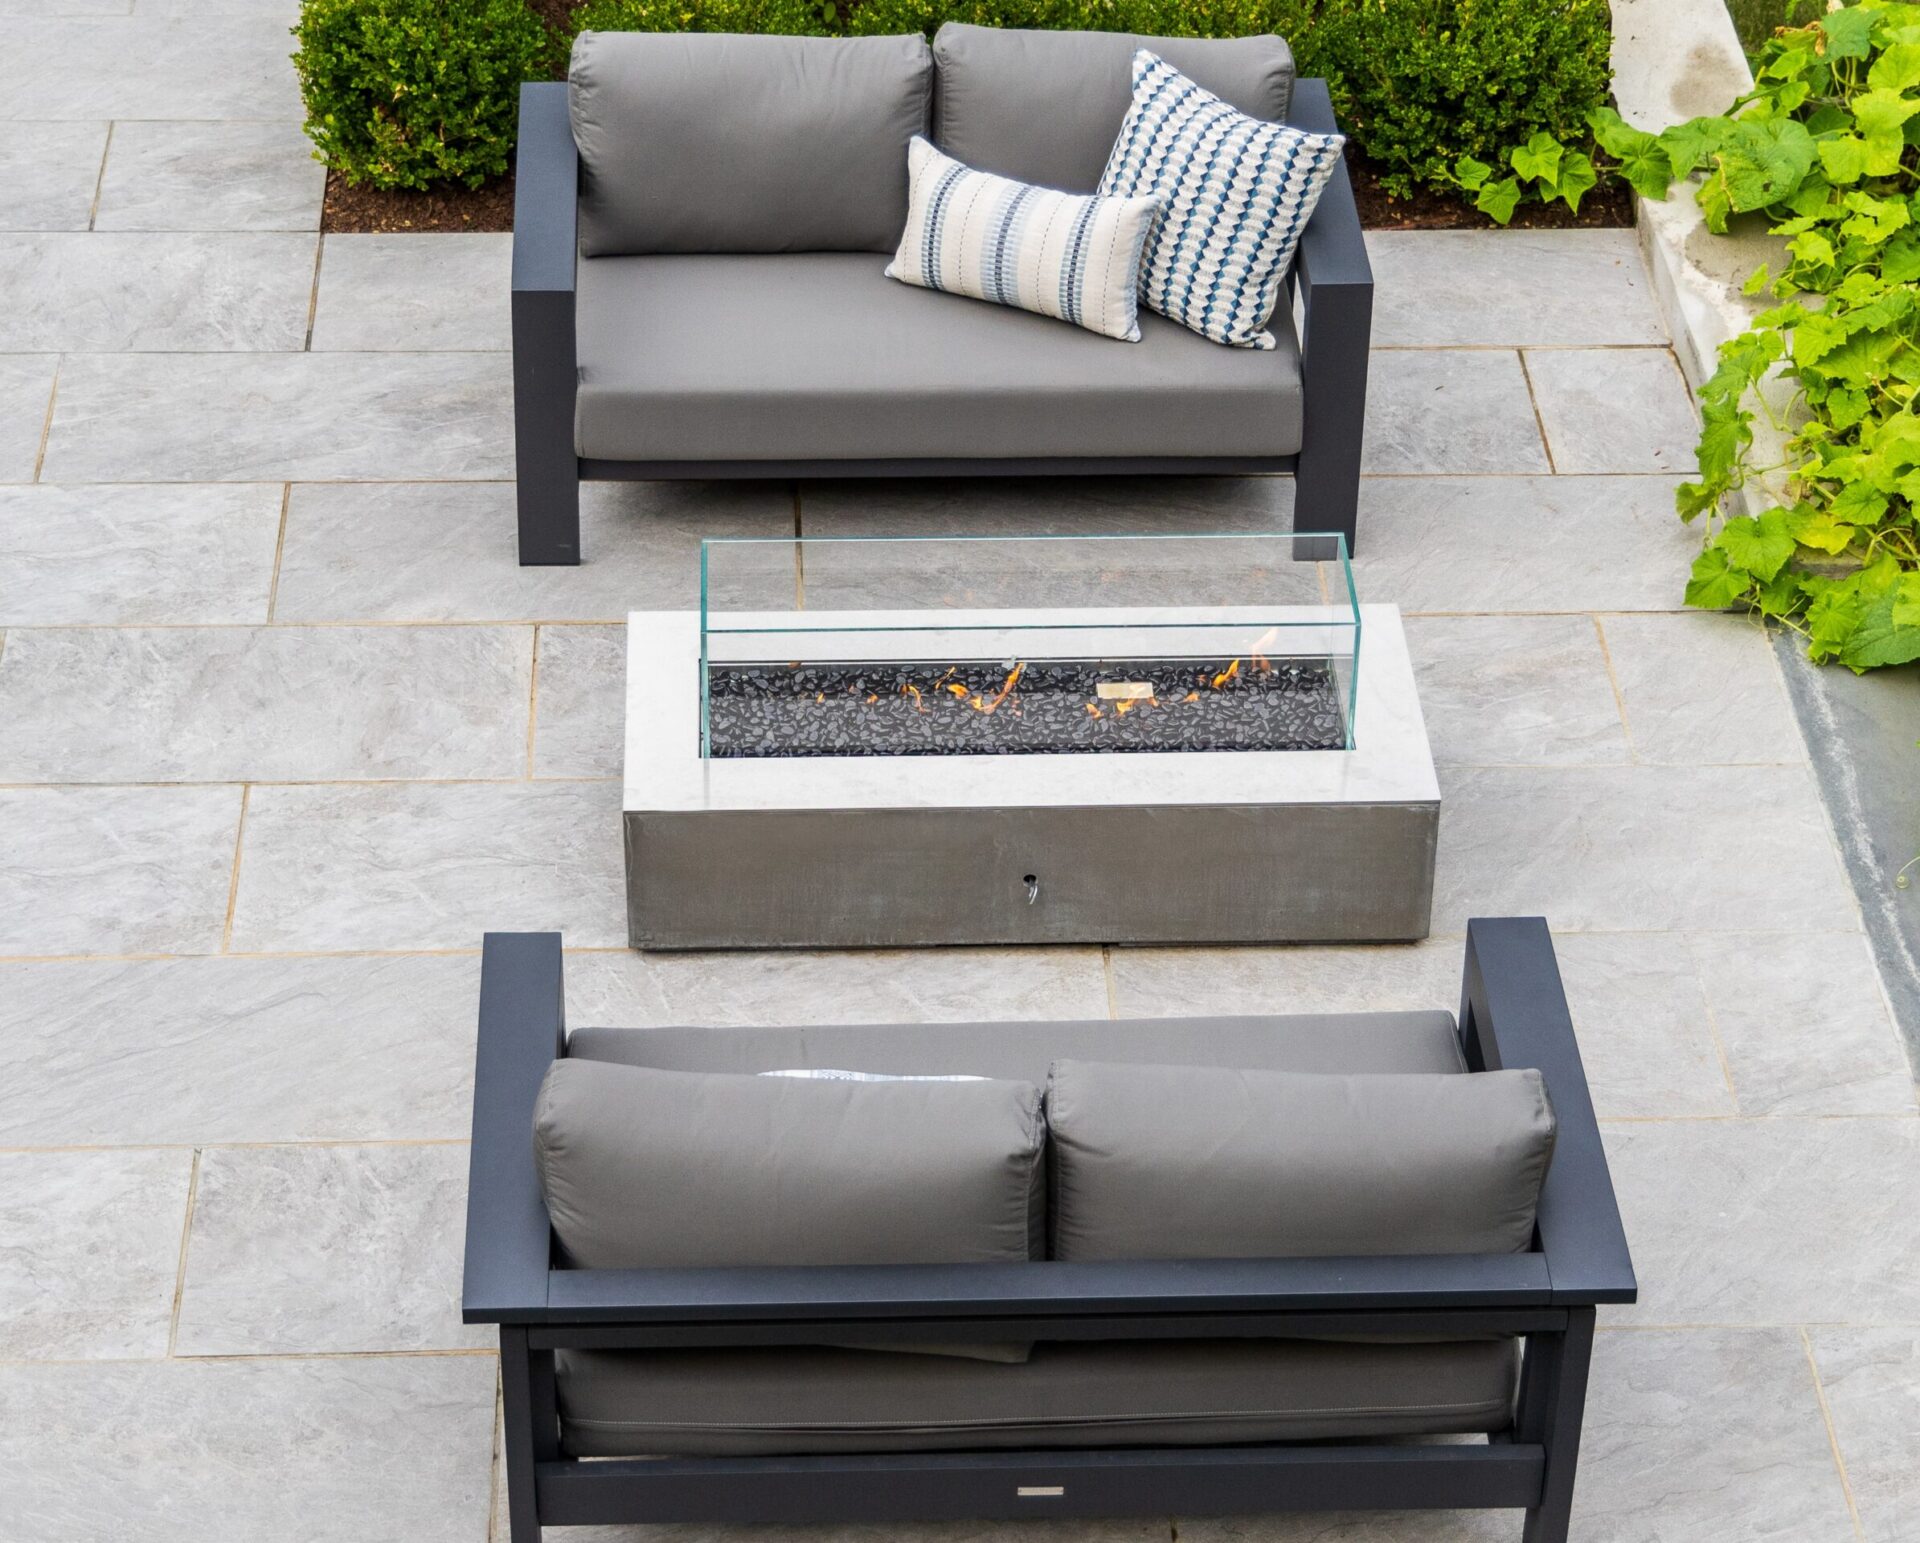 An outdoor setting featuring modern furniture with a fire pit table, two couches with cushions, on a tiled patio with surrounding green plants.